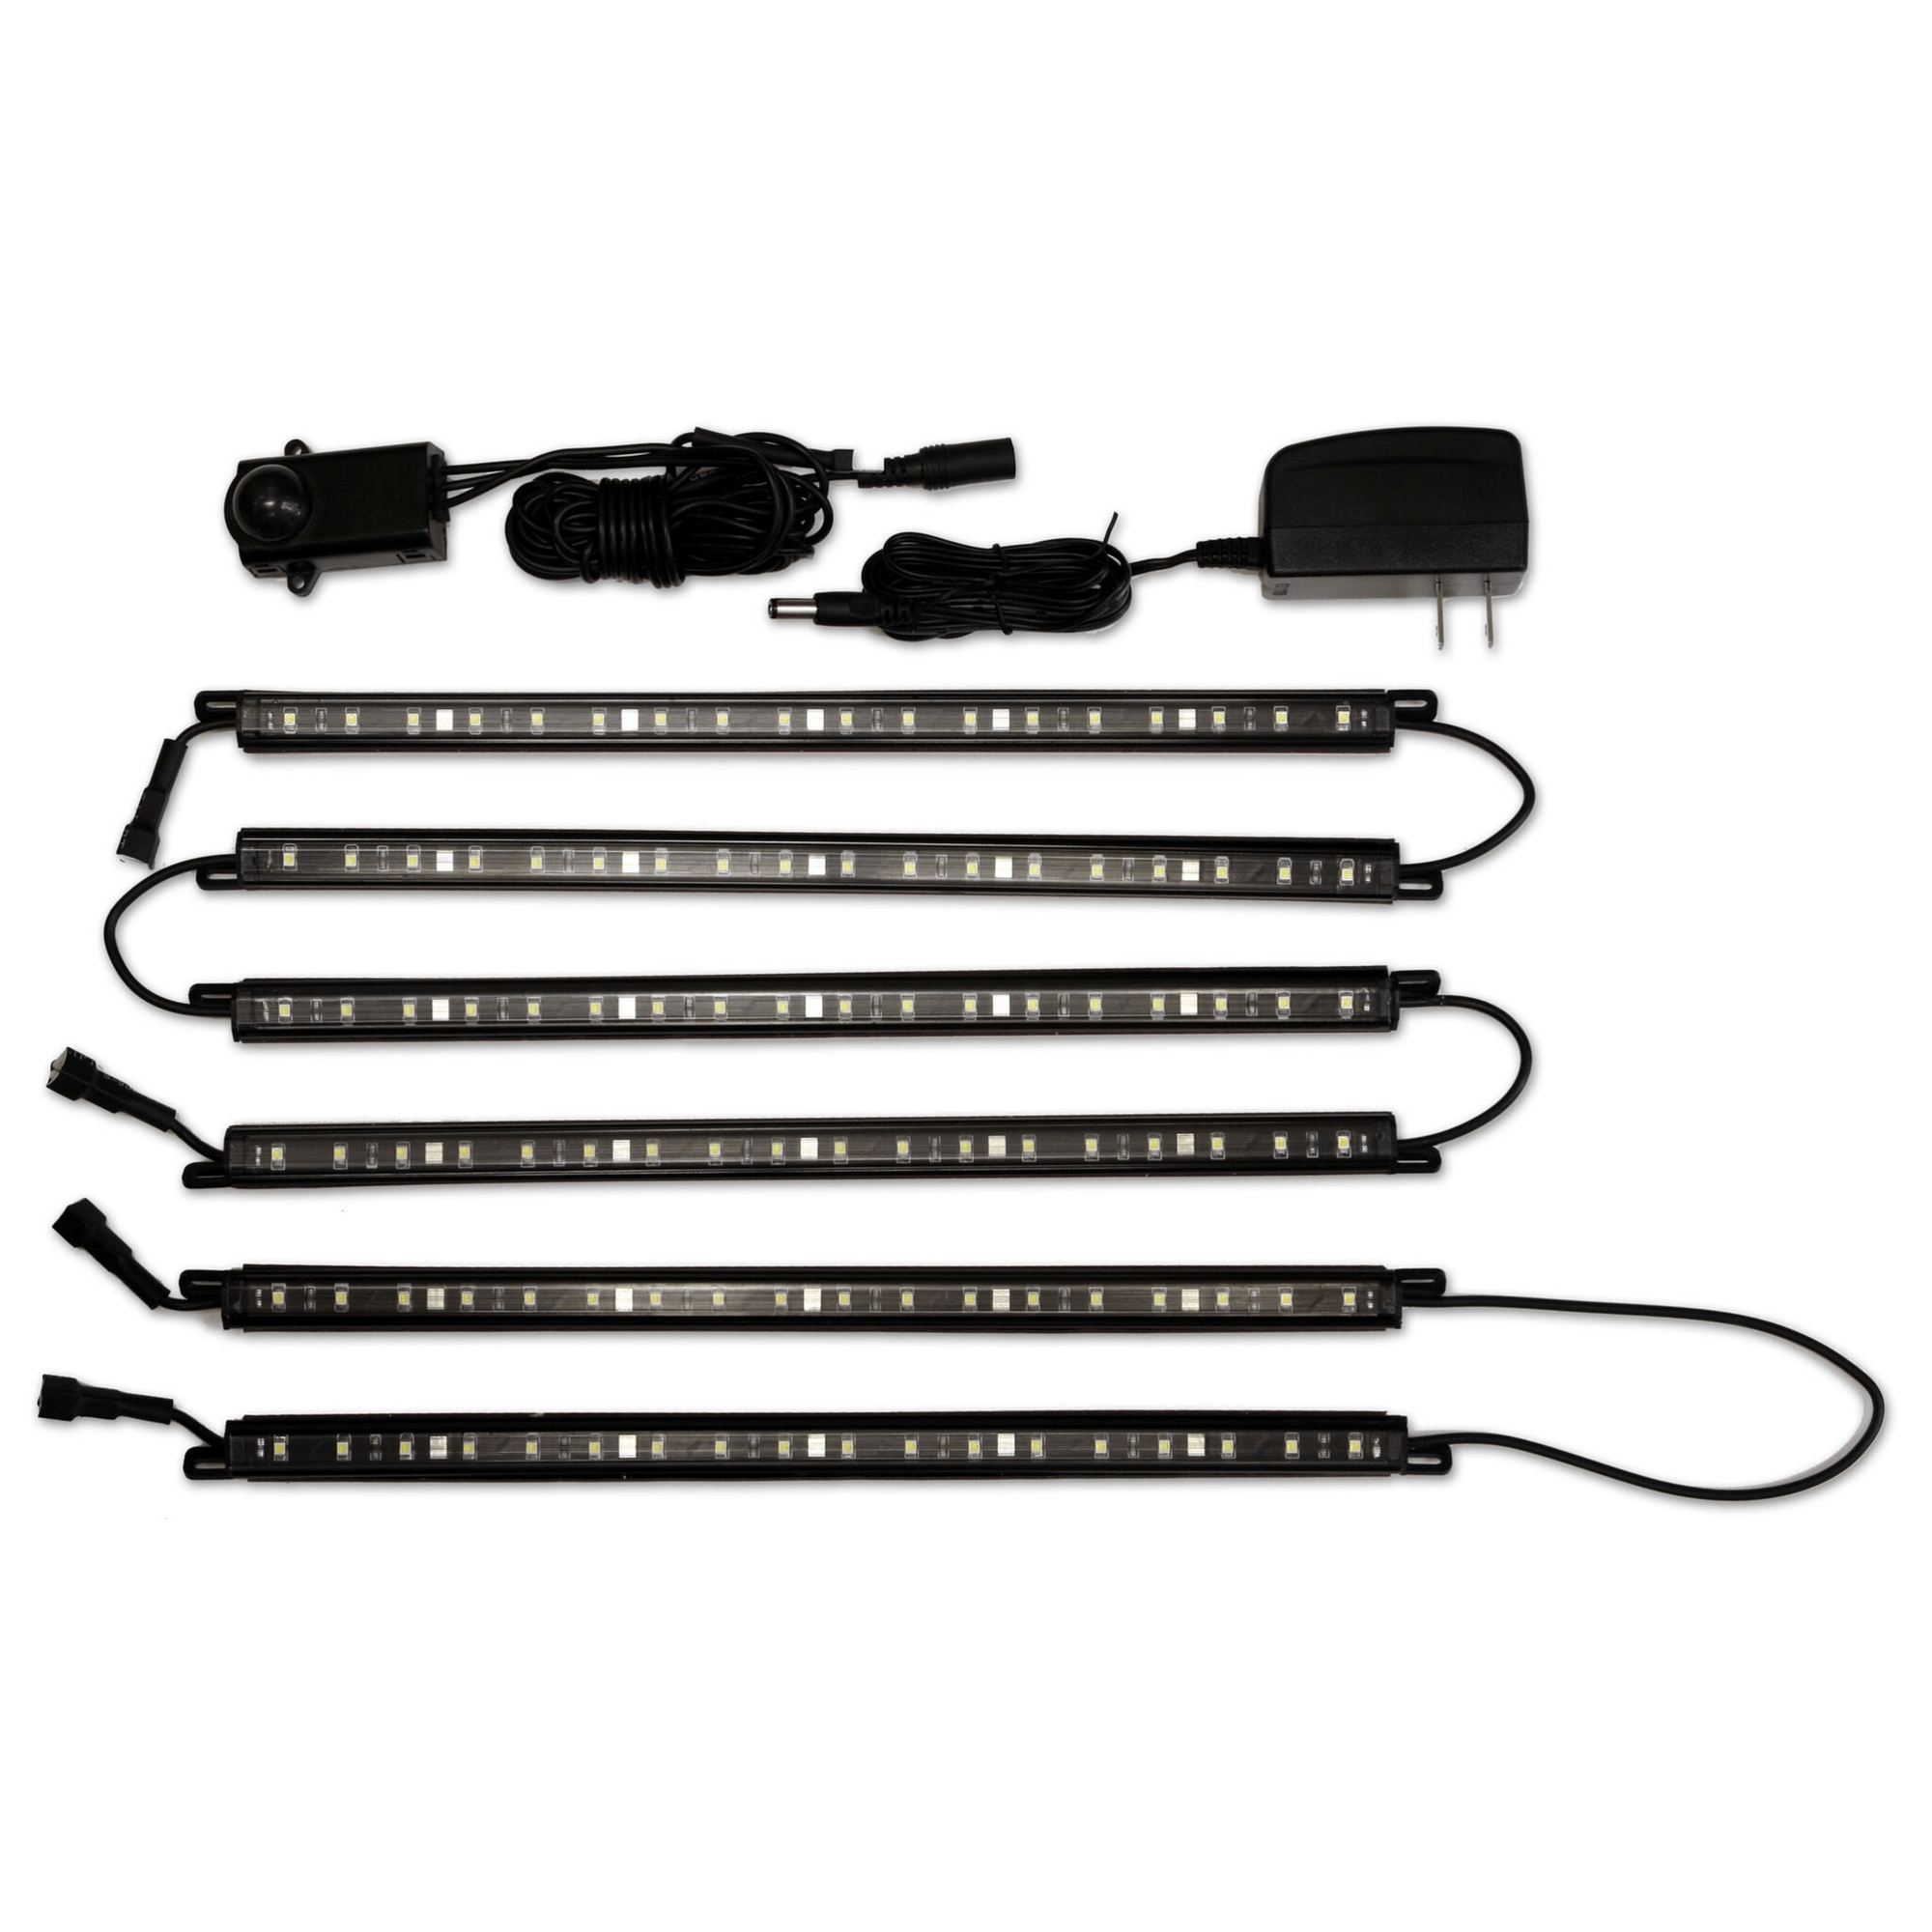 Accessory - Lights - Clearview Safe Light Kit - (6 wand lights) | Liberty Safe Norcal.